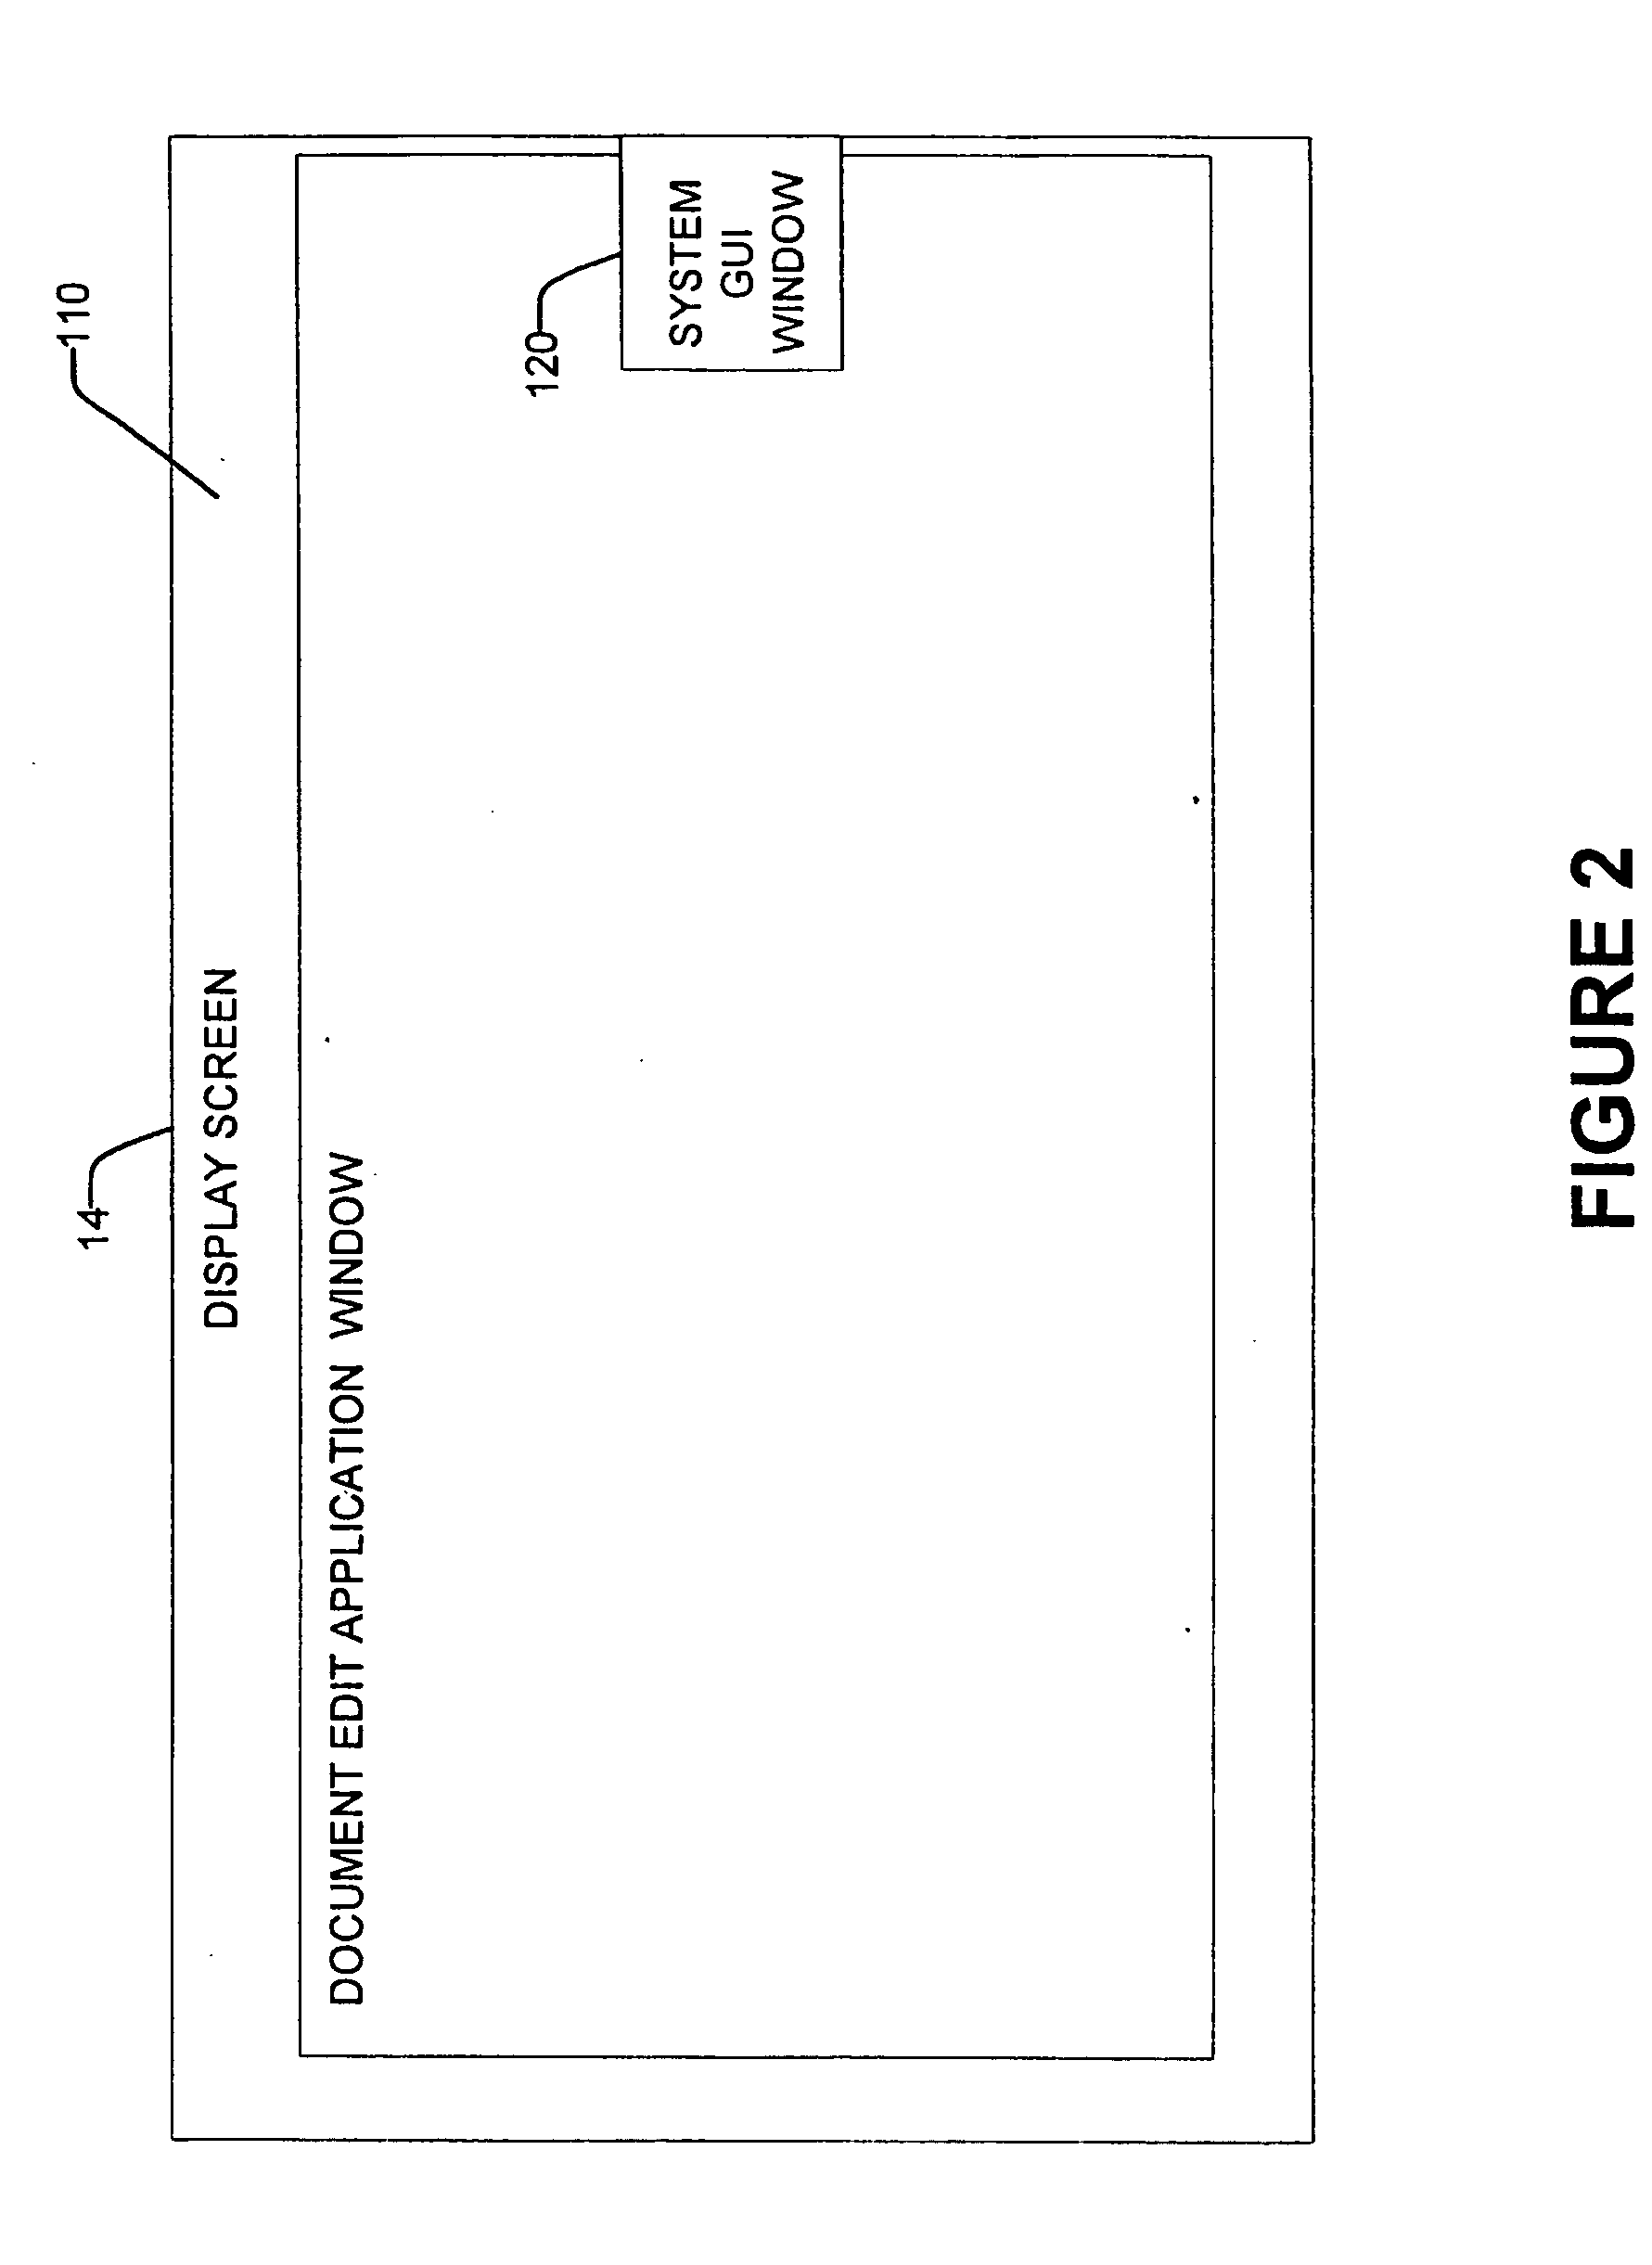 Automated system and methods for determining the activity focus of a user in a computerized environment